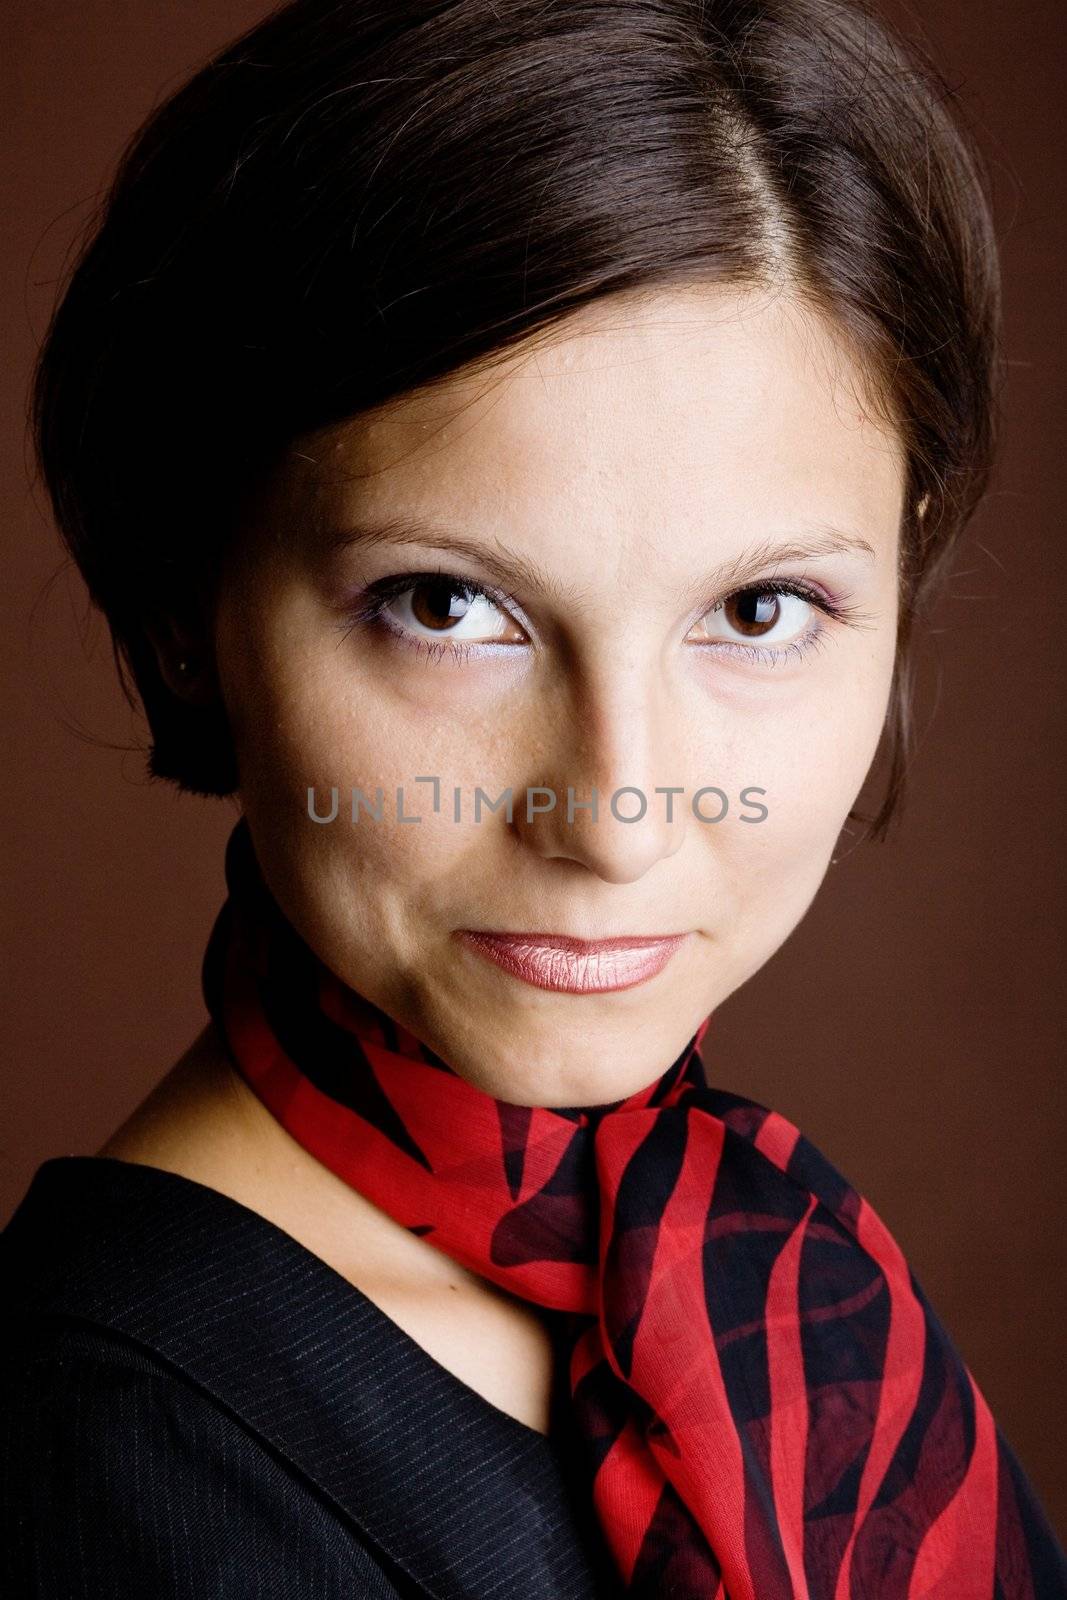 An image of a young woman in a scarf